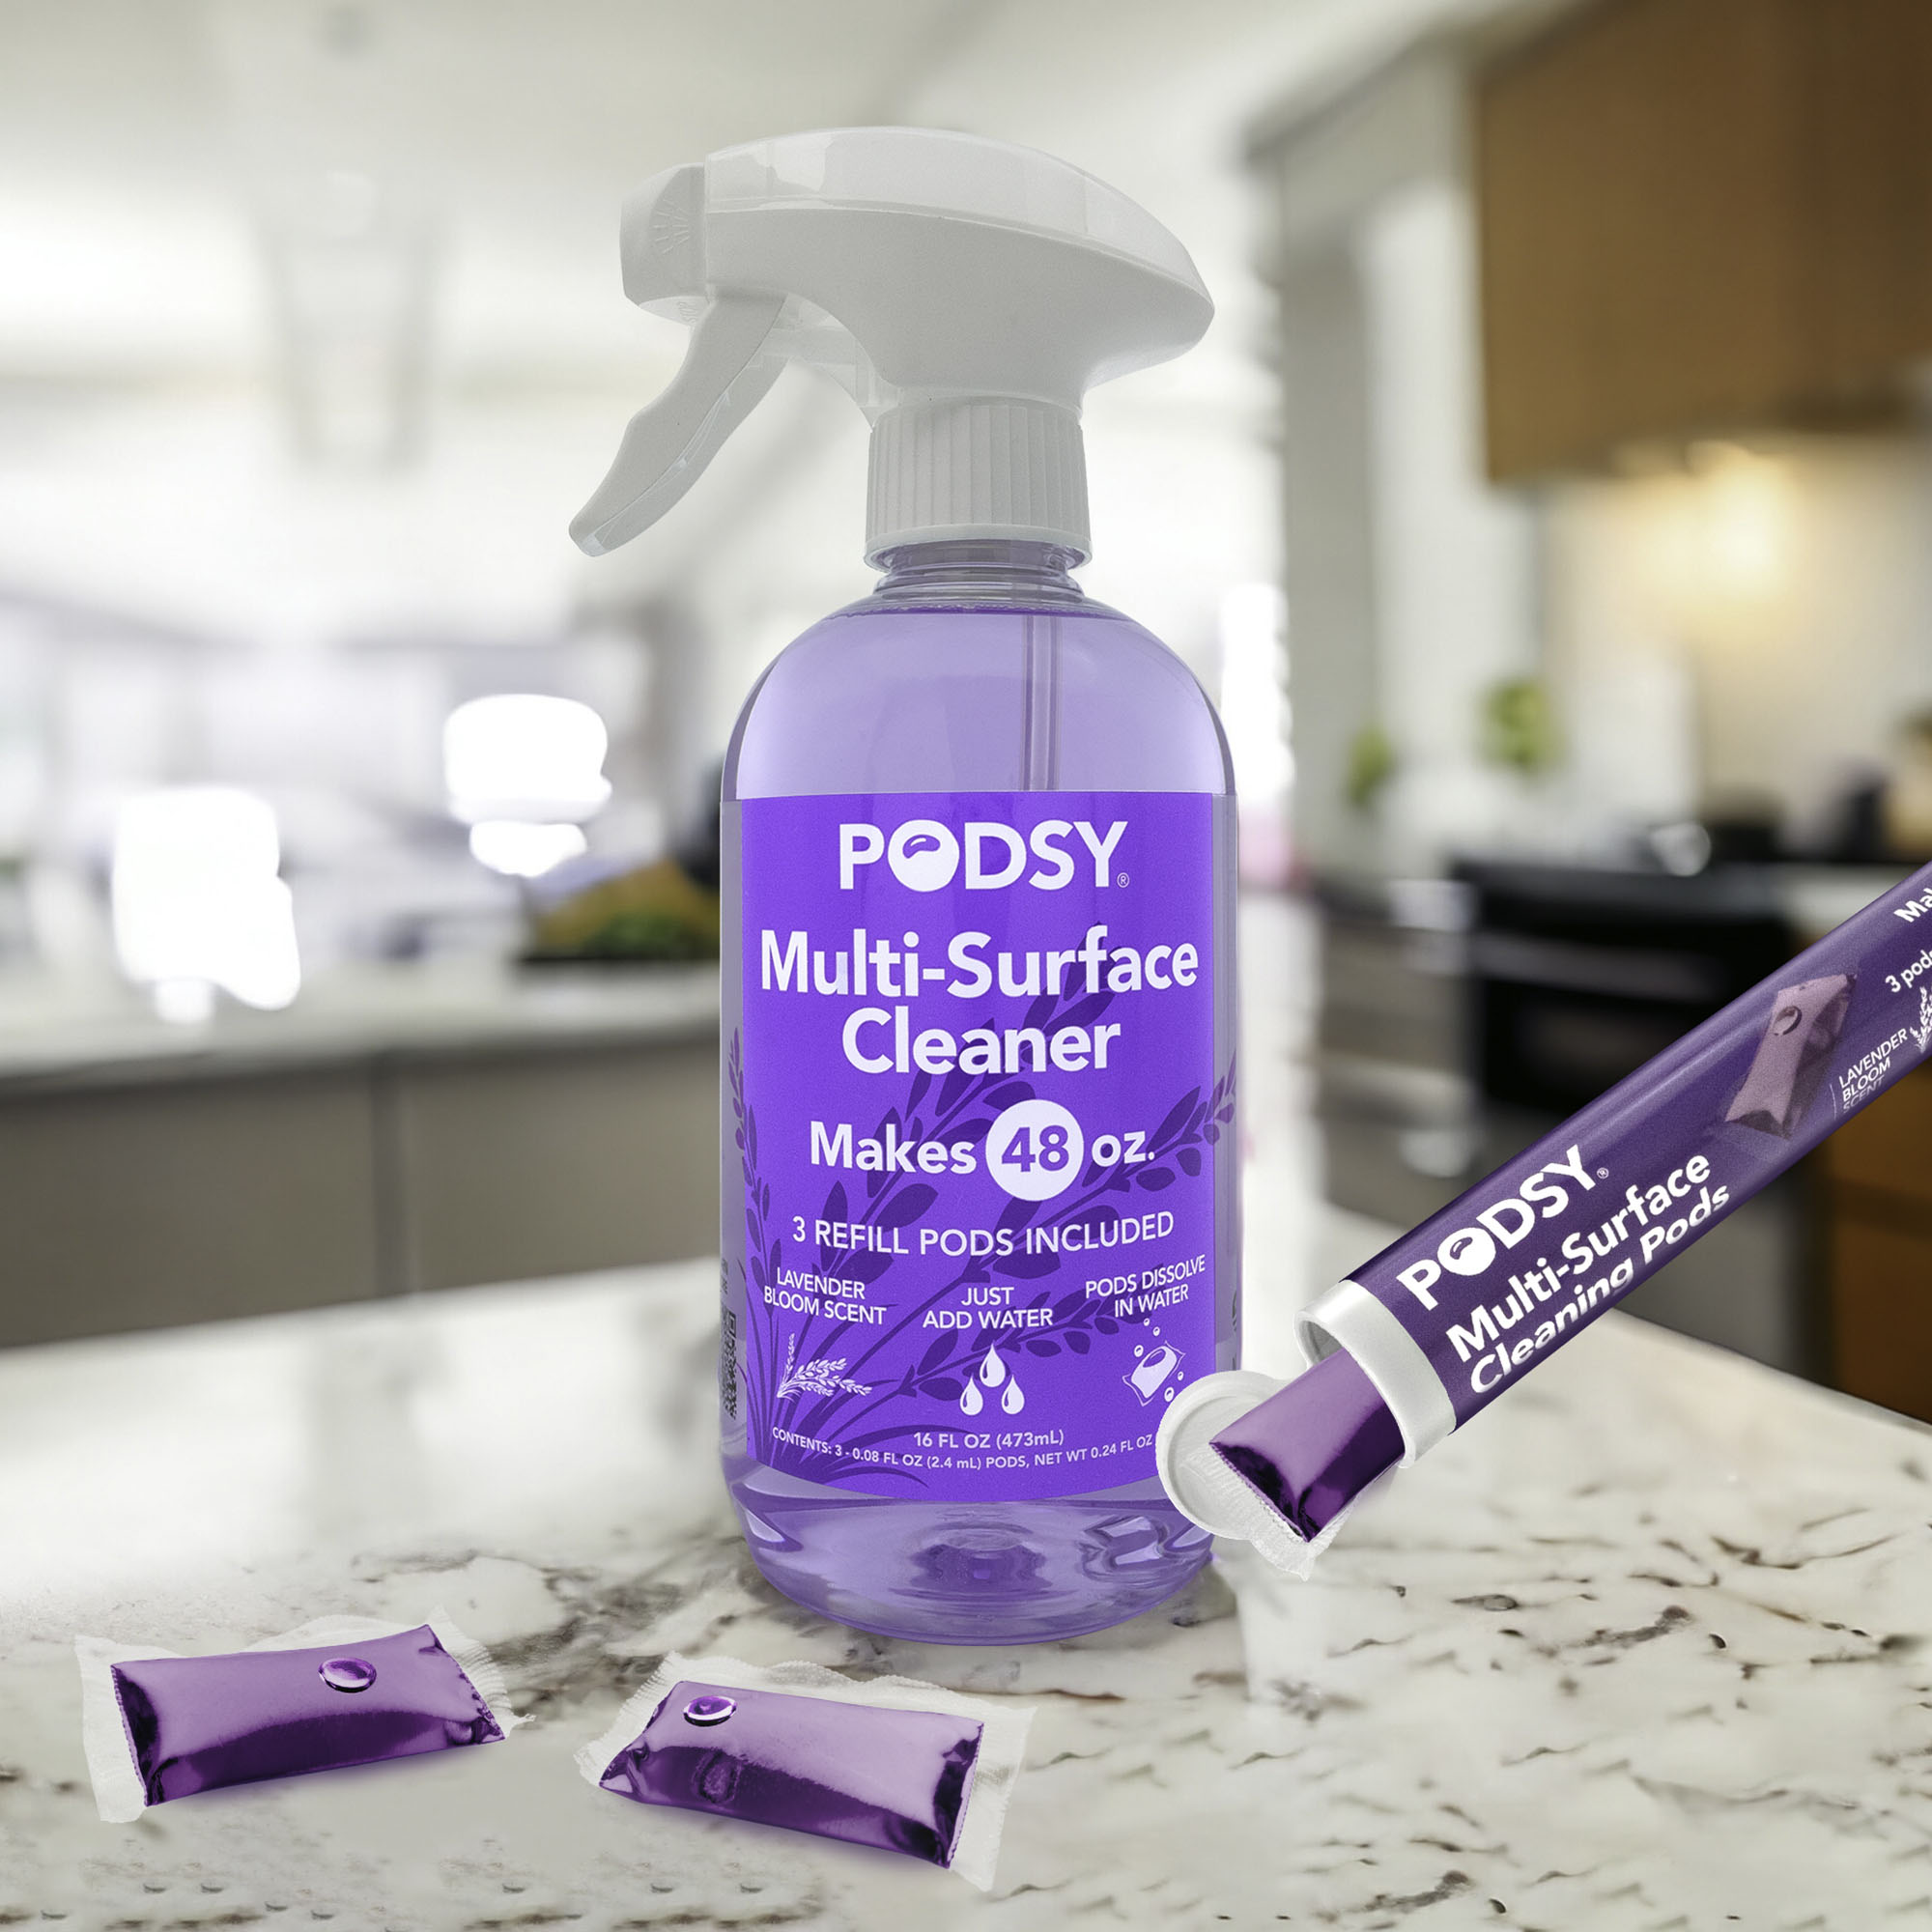 Podsy Multi-Surface Cleaner and Refill Pods